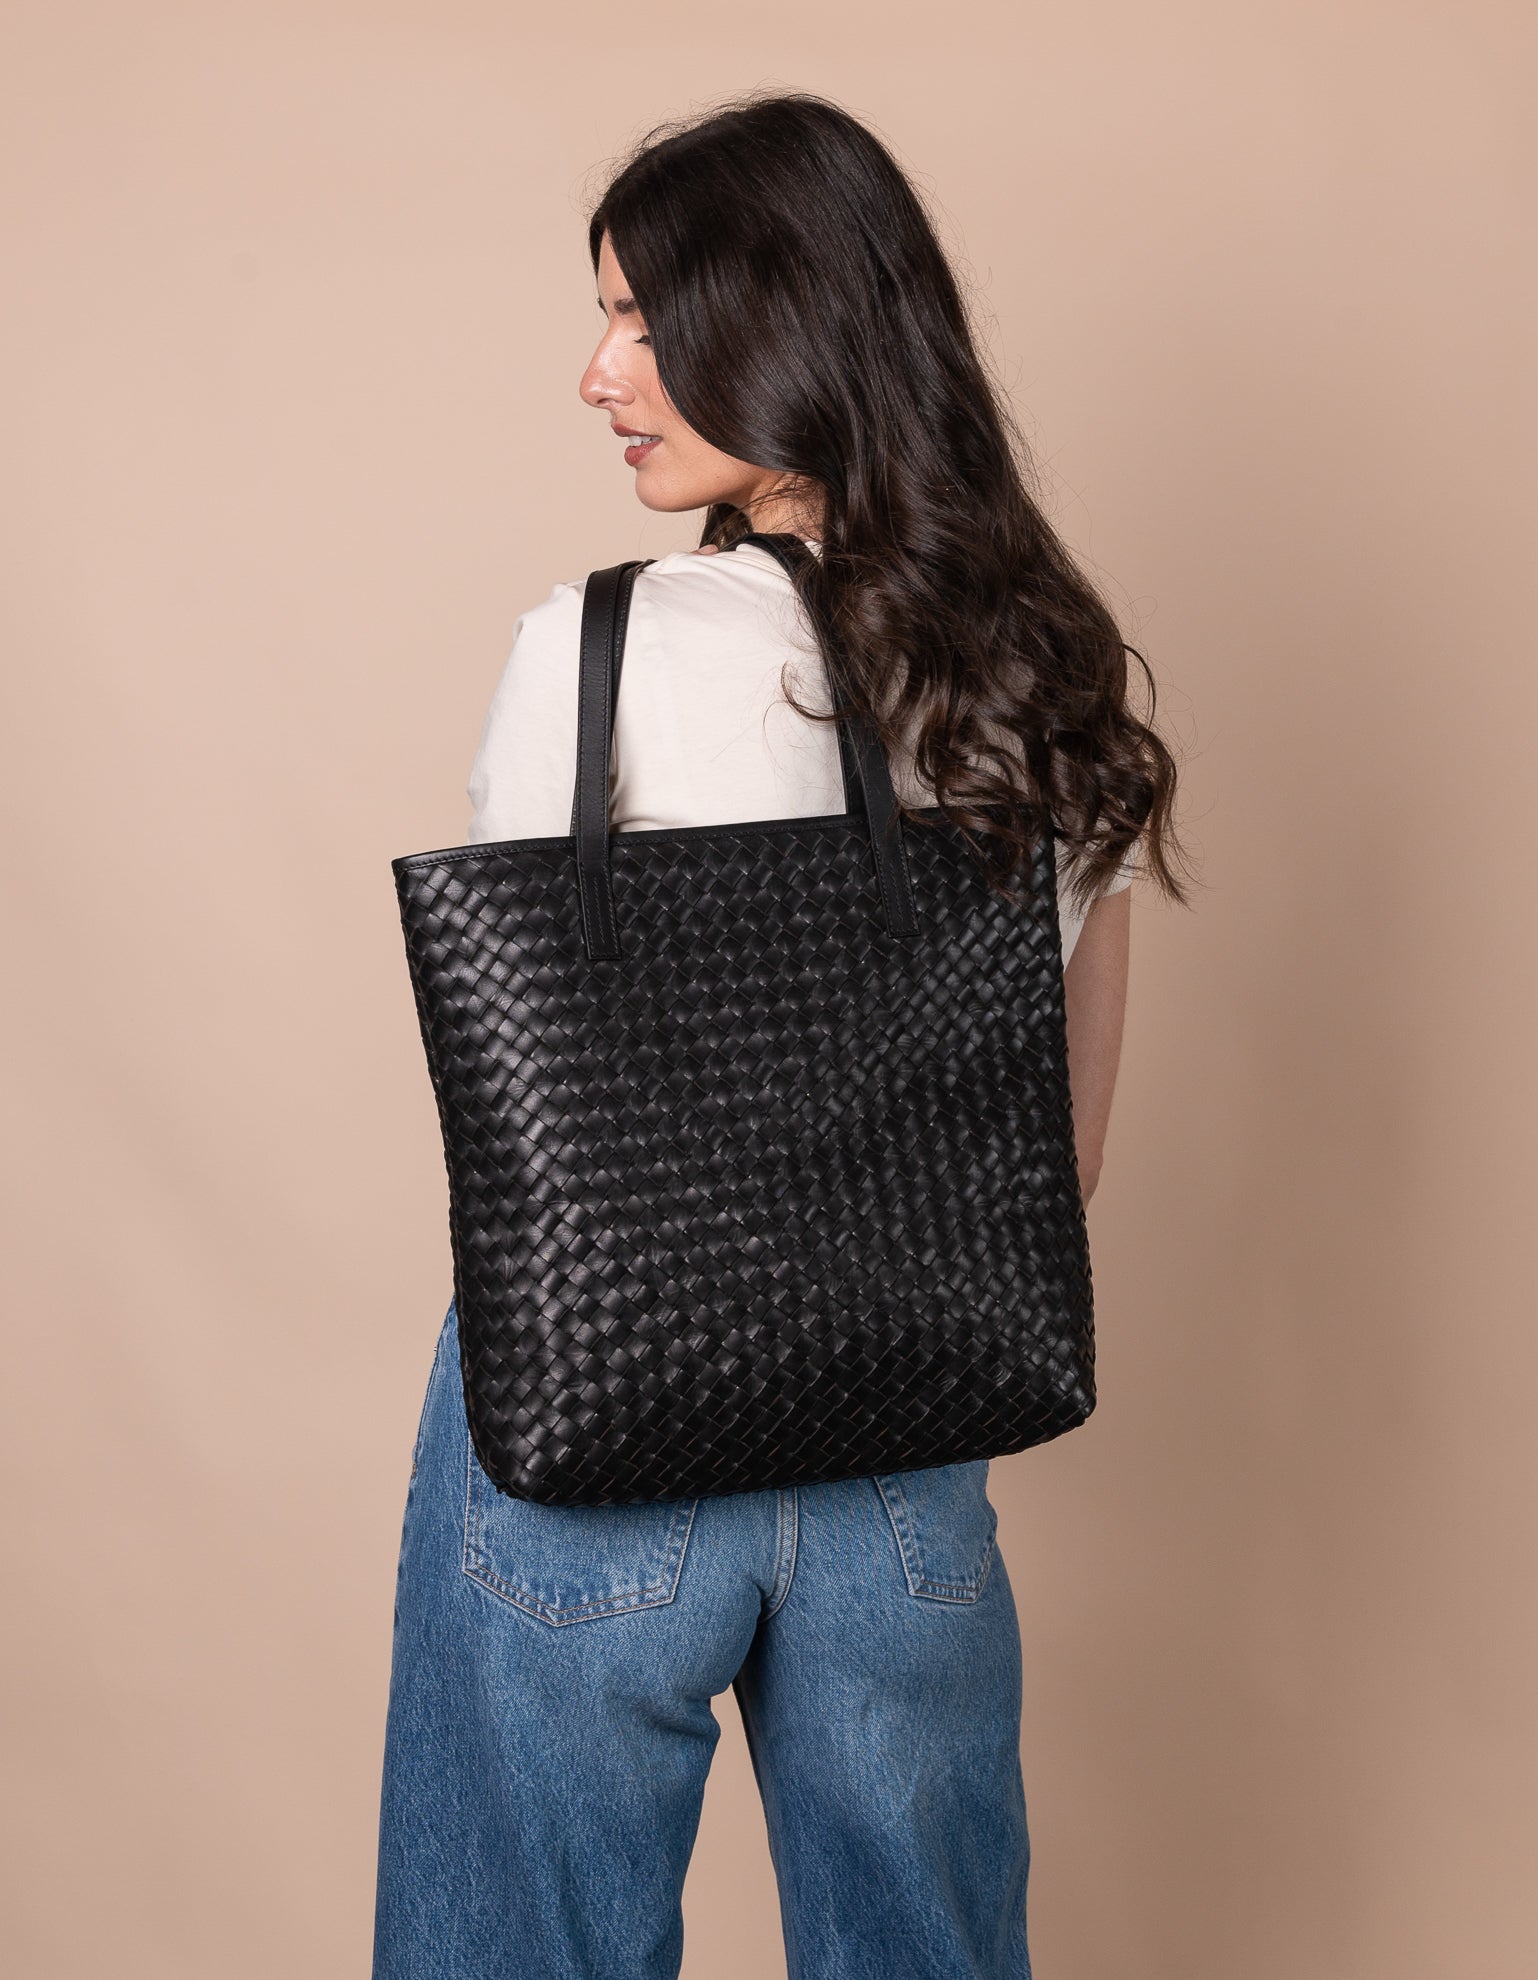 Model with Georgia bag in black woven classic leather